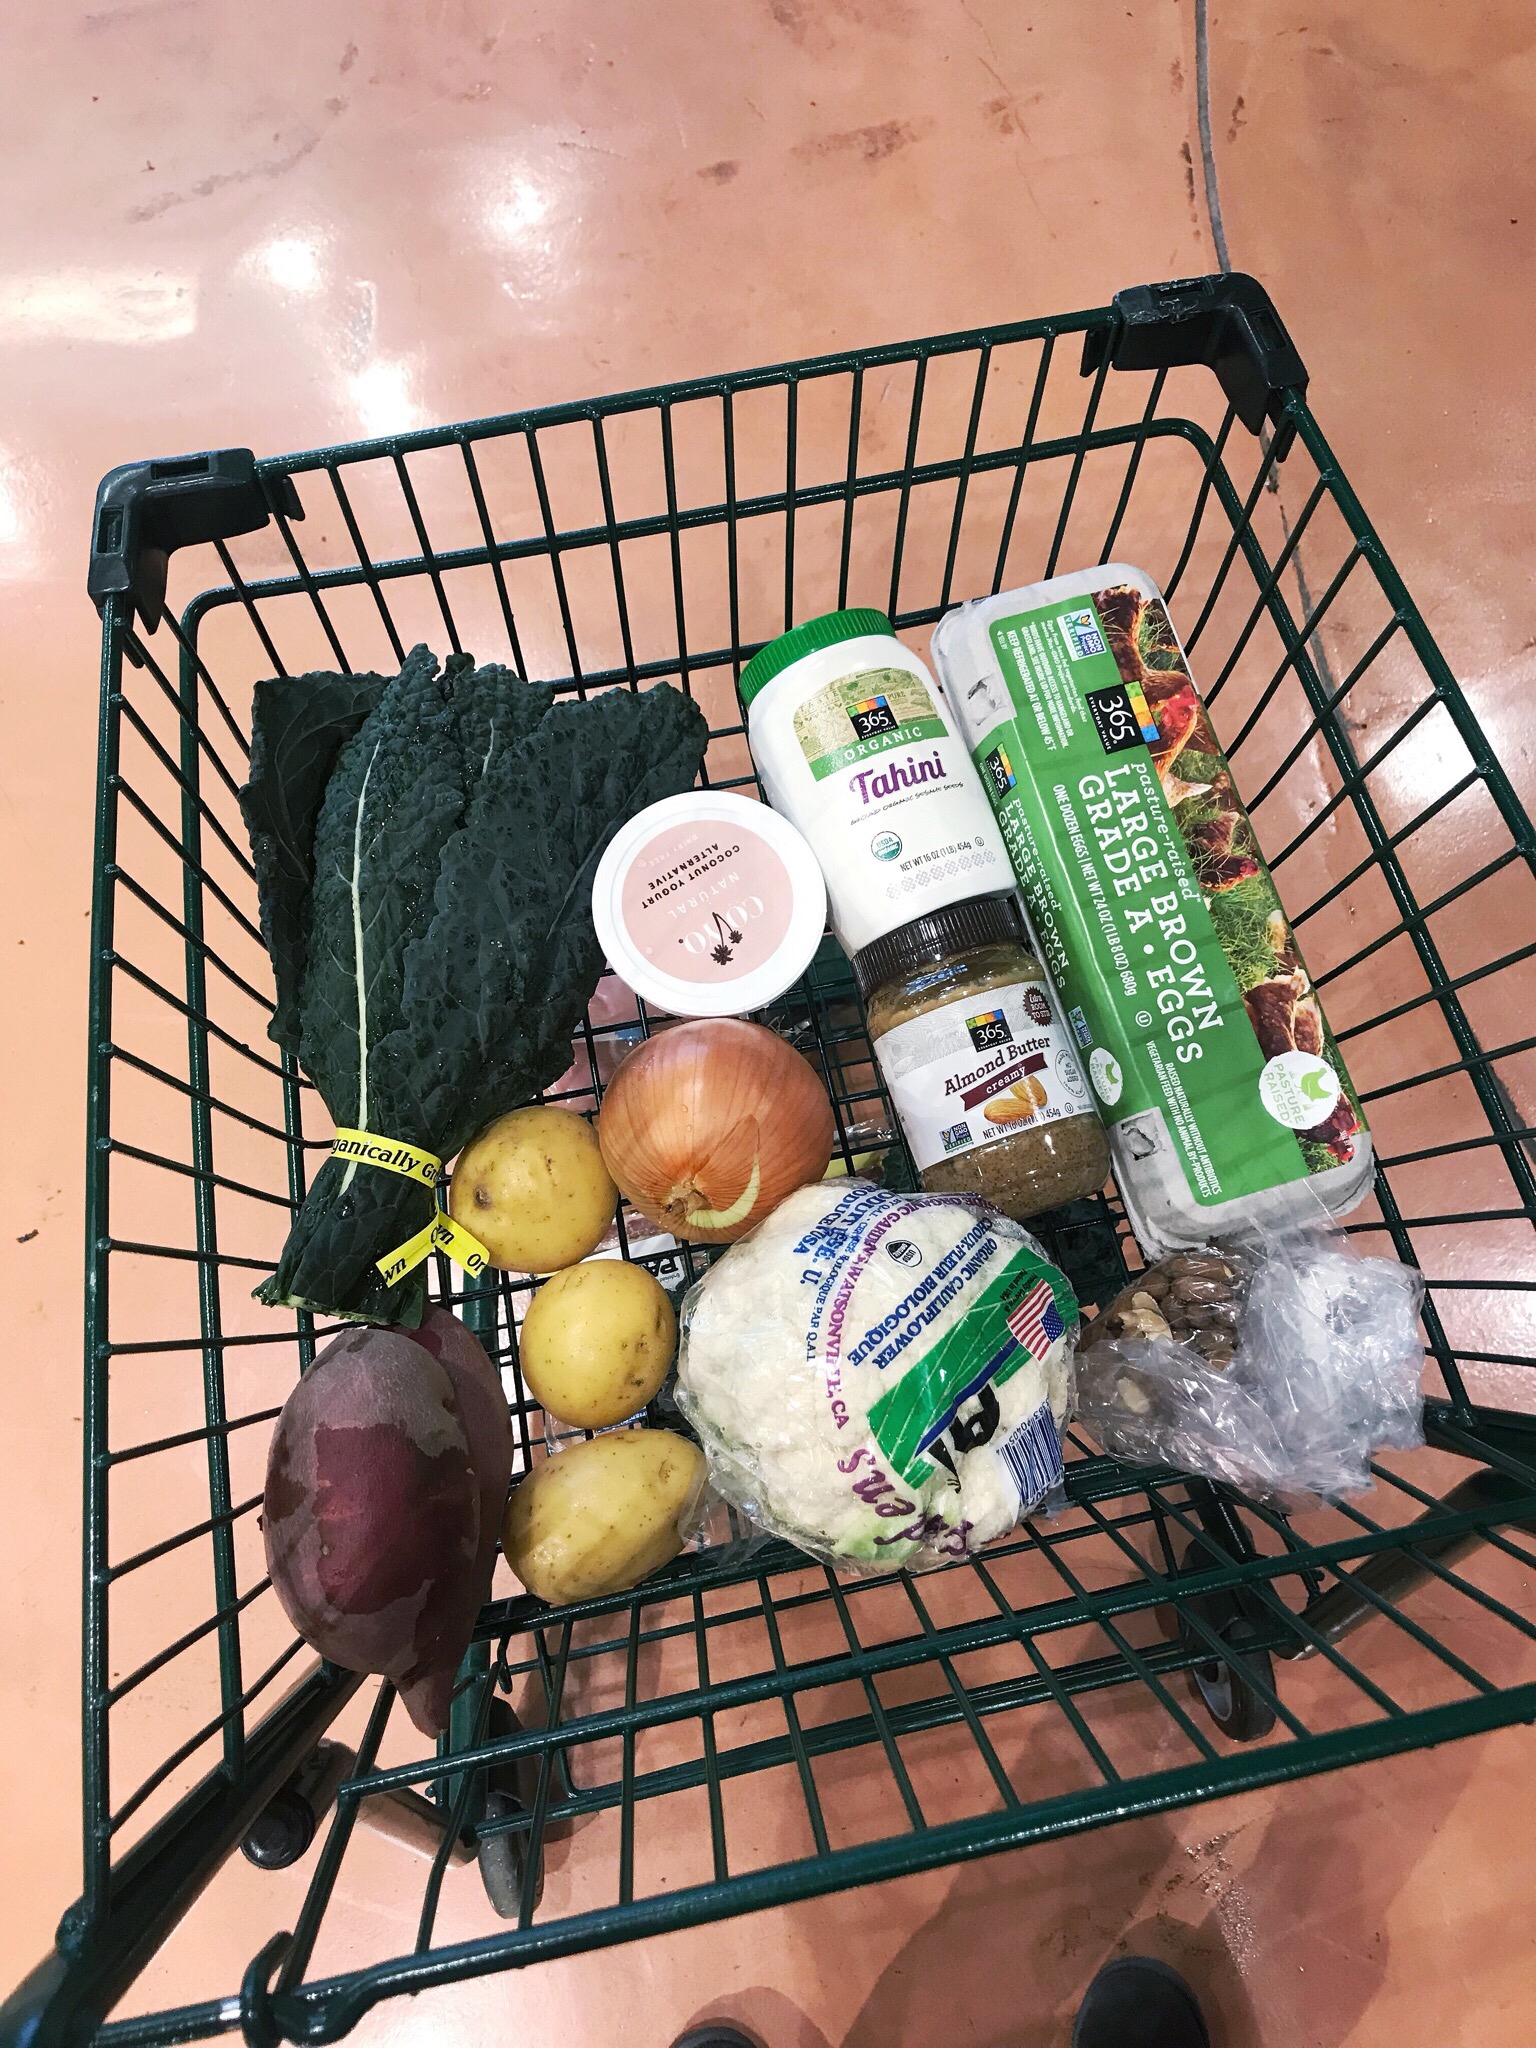 Take a look behind the scenes and peek into my grocery cart. Bonus: you can download a grocery list and meal planning printable!